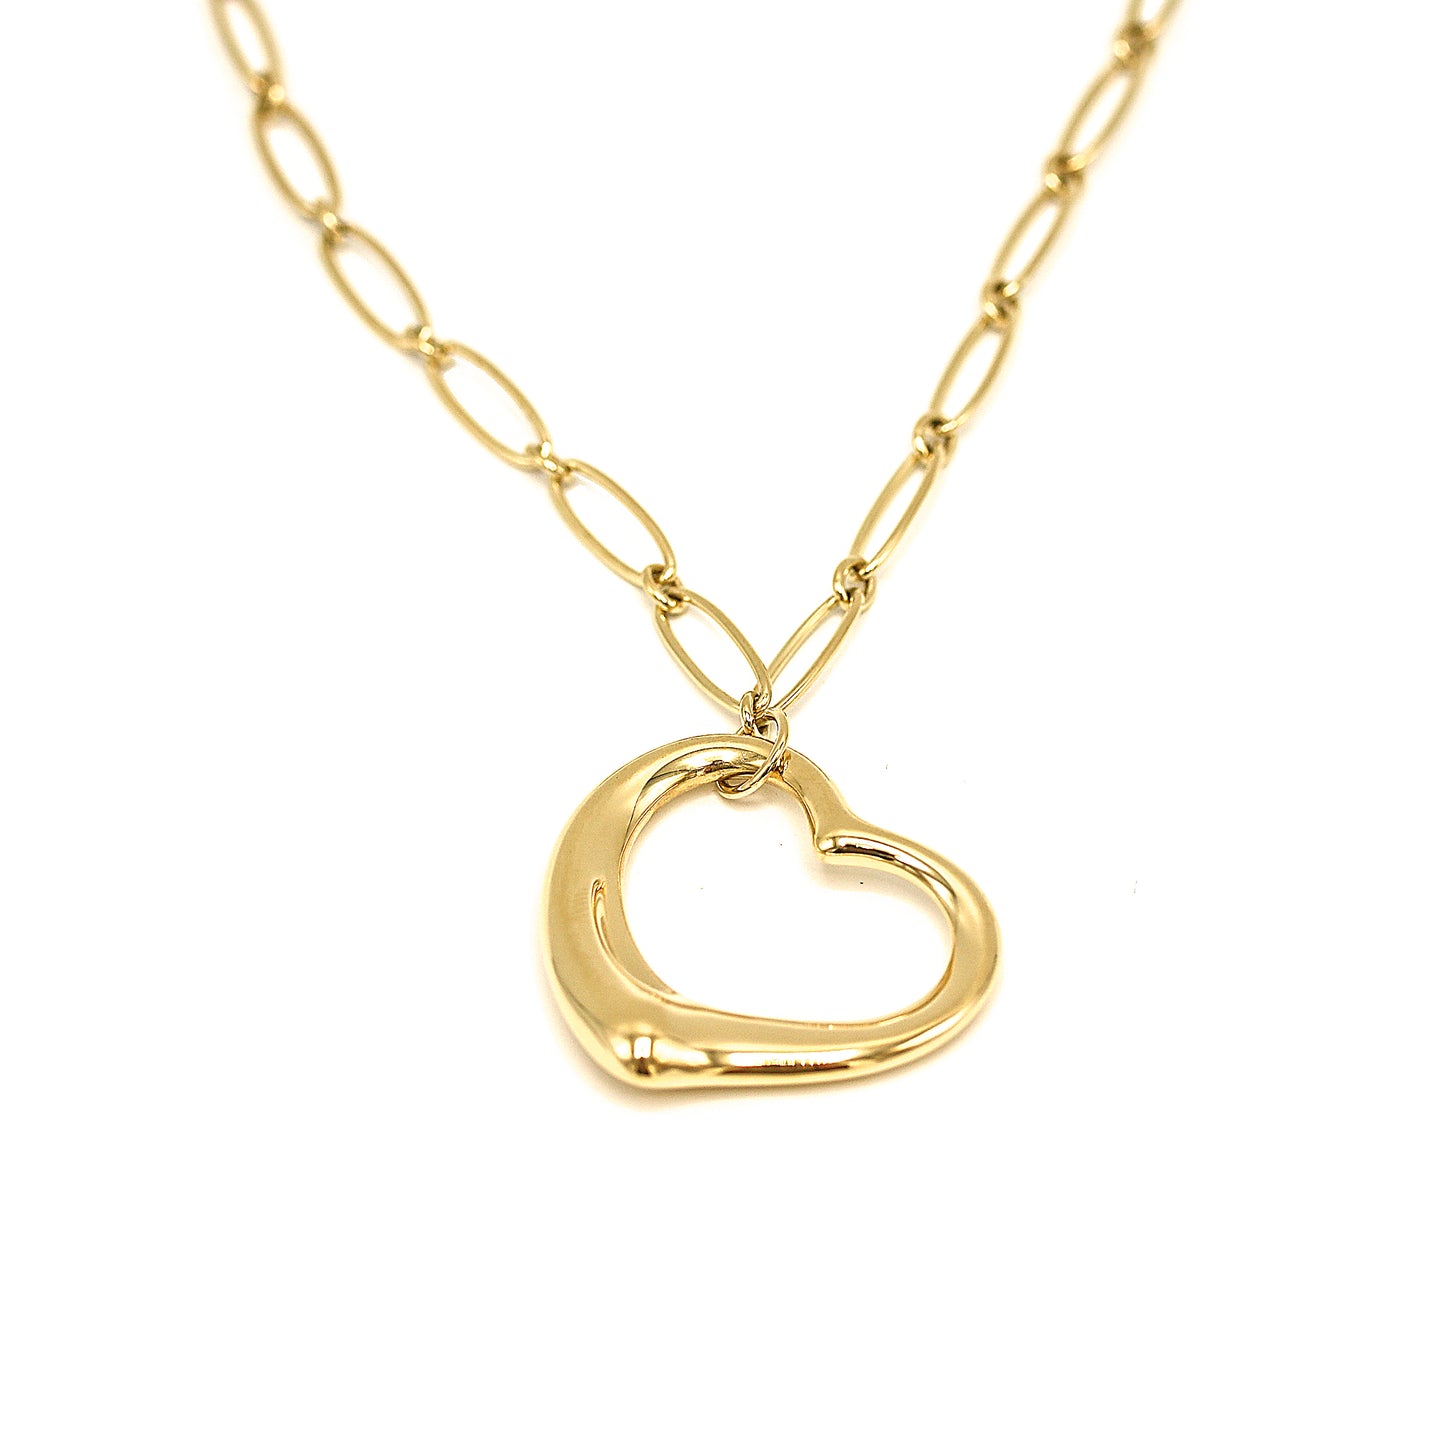 Tiffany and Co. Elsa Peretti Open Heart Pendant with Link Chain Necklace